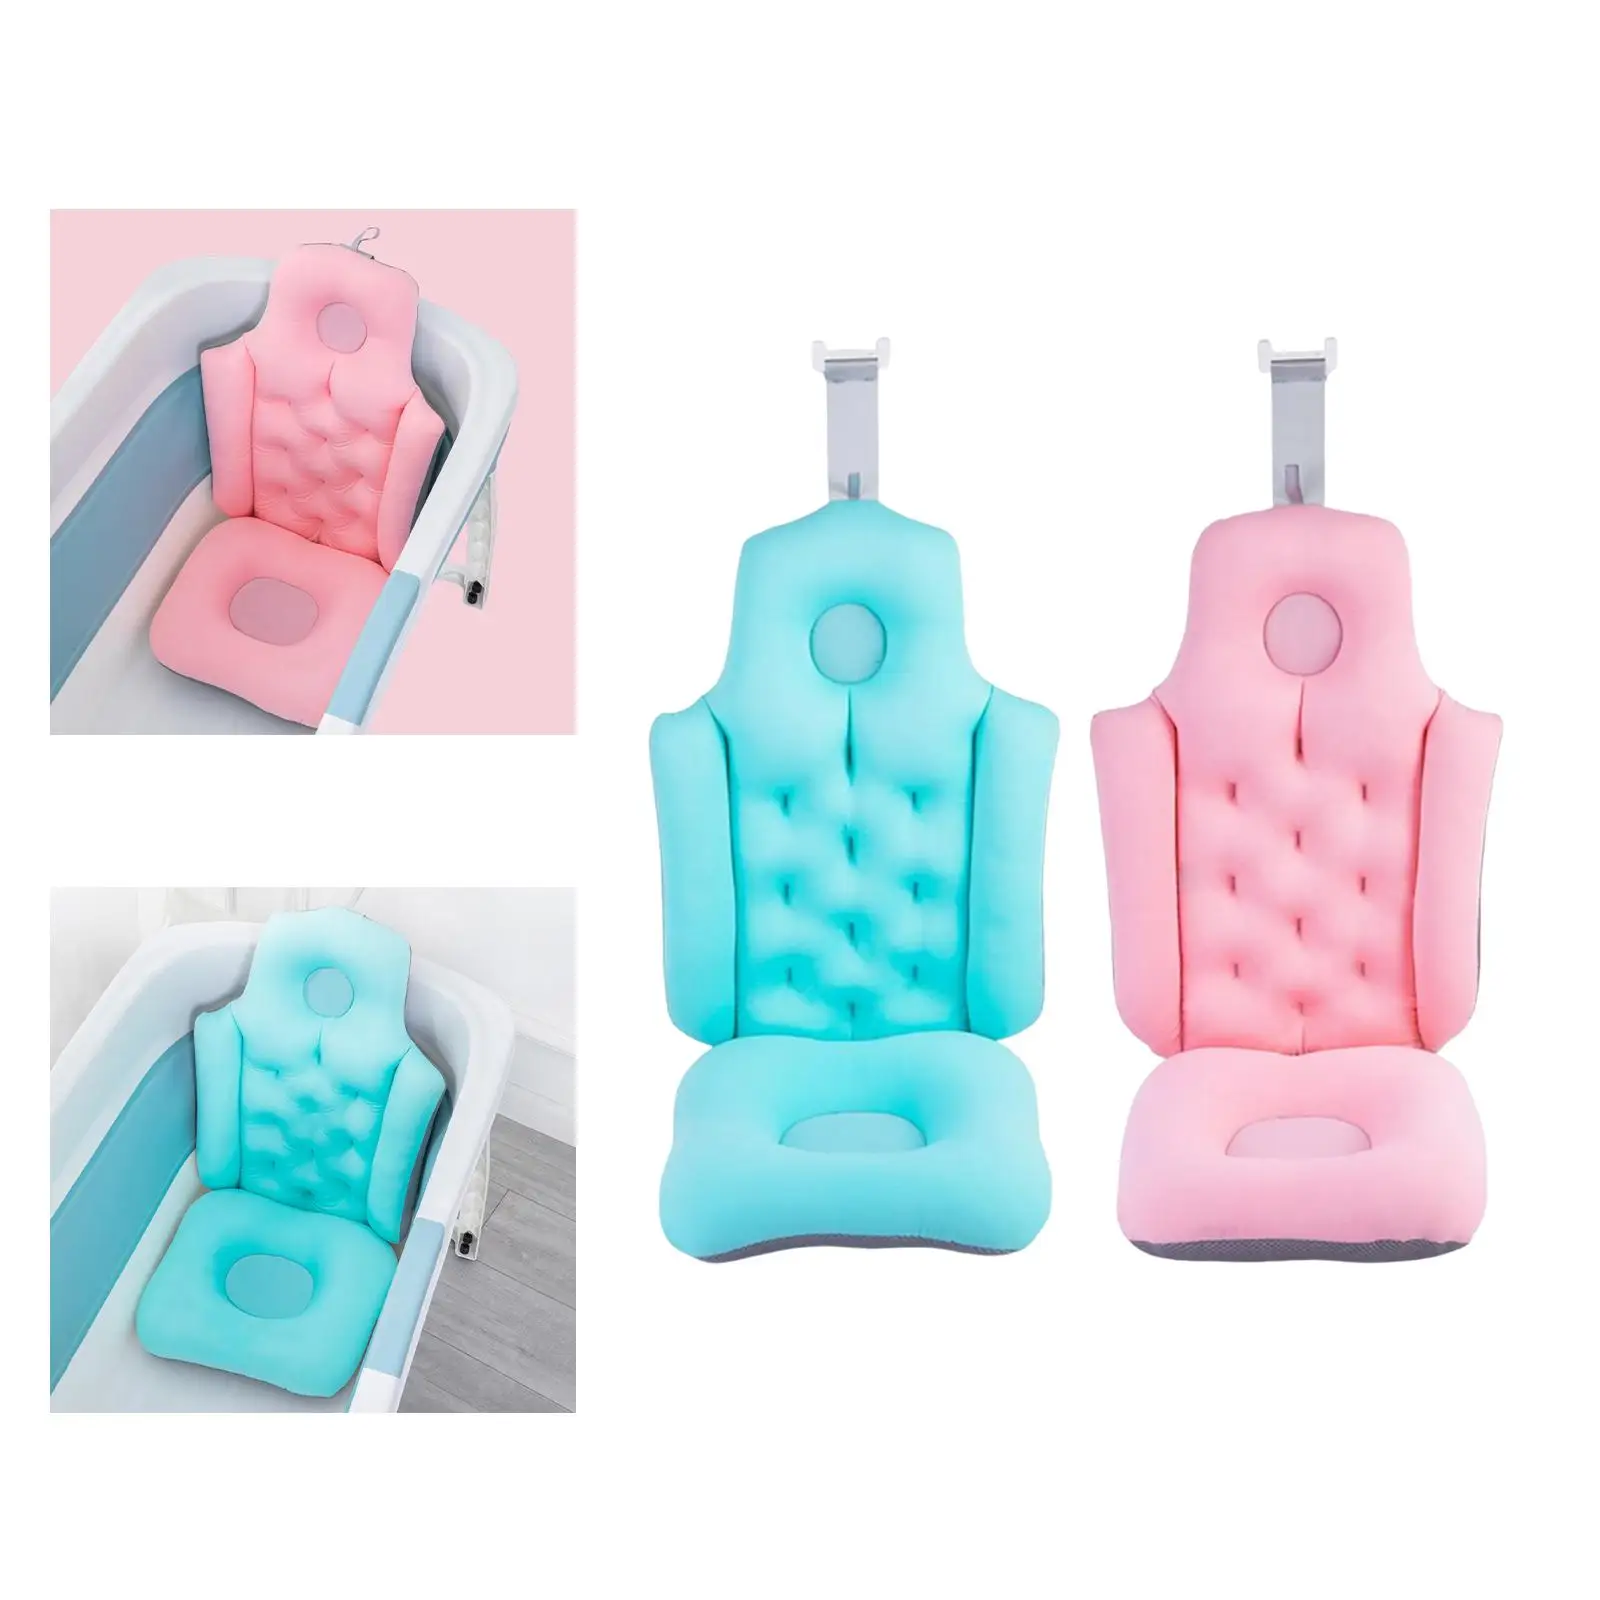 Full Body Bath Pillow Accessories Bath Cushion Waterproof Neck Support Breathable Shower Pillow SPA Bathtub Pillow for Tub